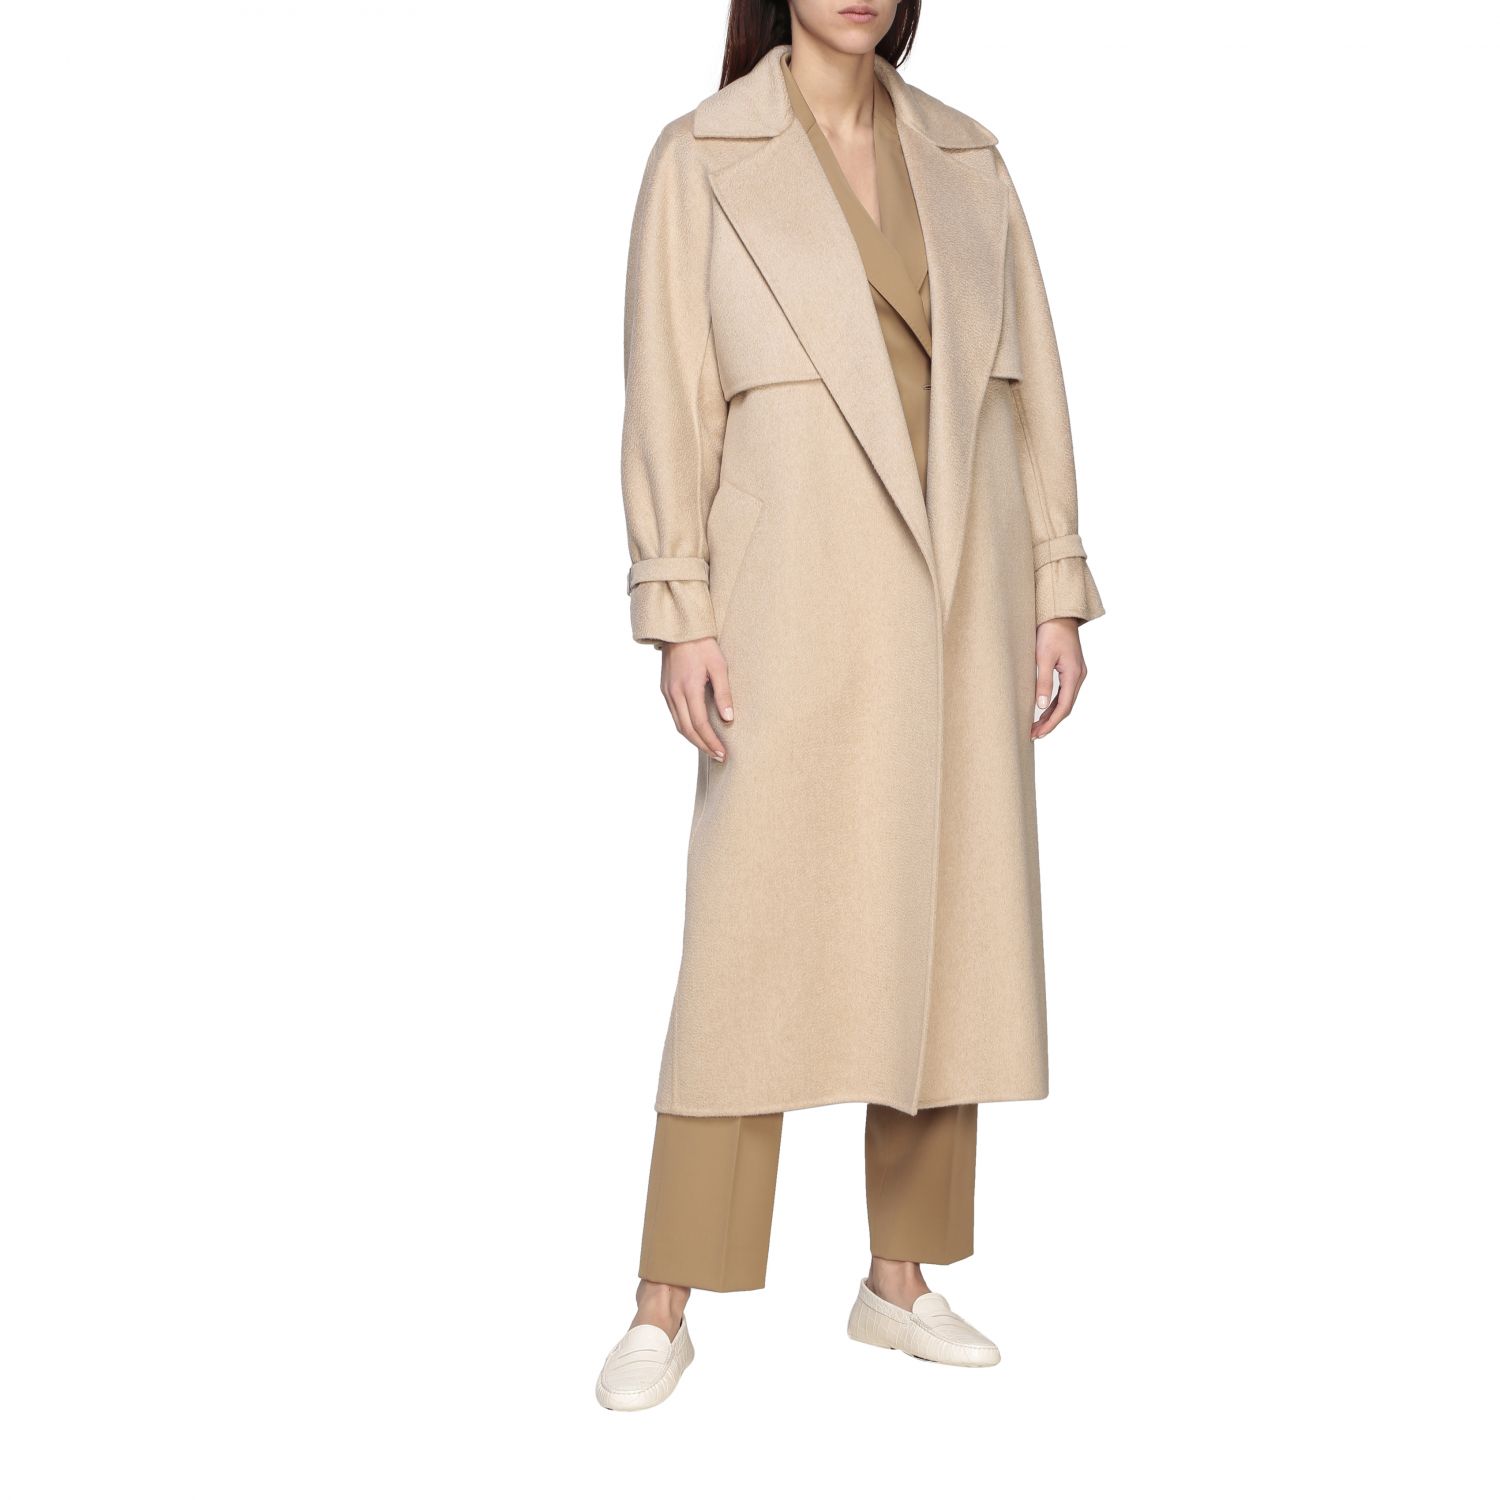 Max Mara Outlet: Agar 2 piece trench coat with vest and bolero | Coat ...